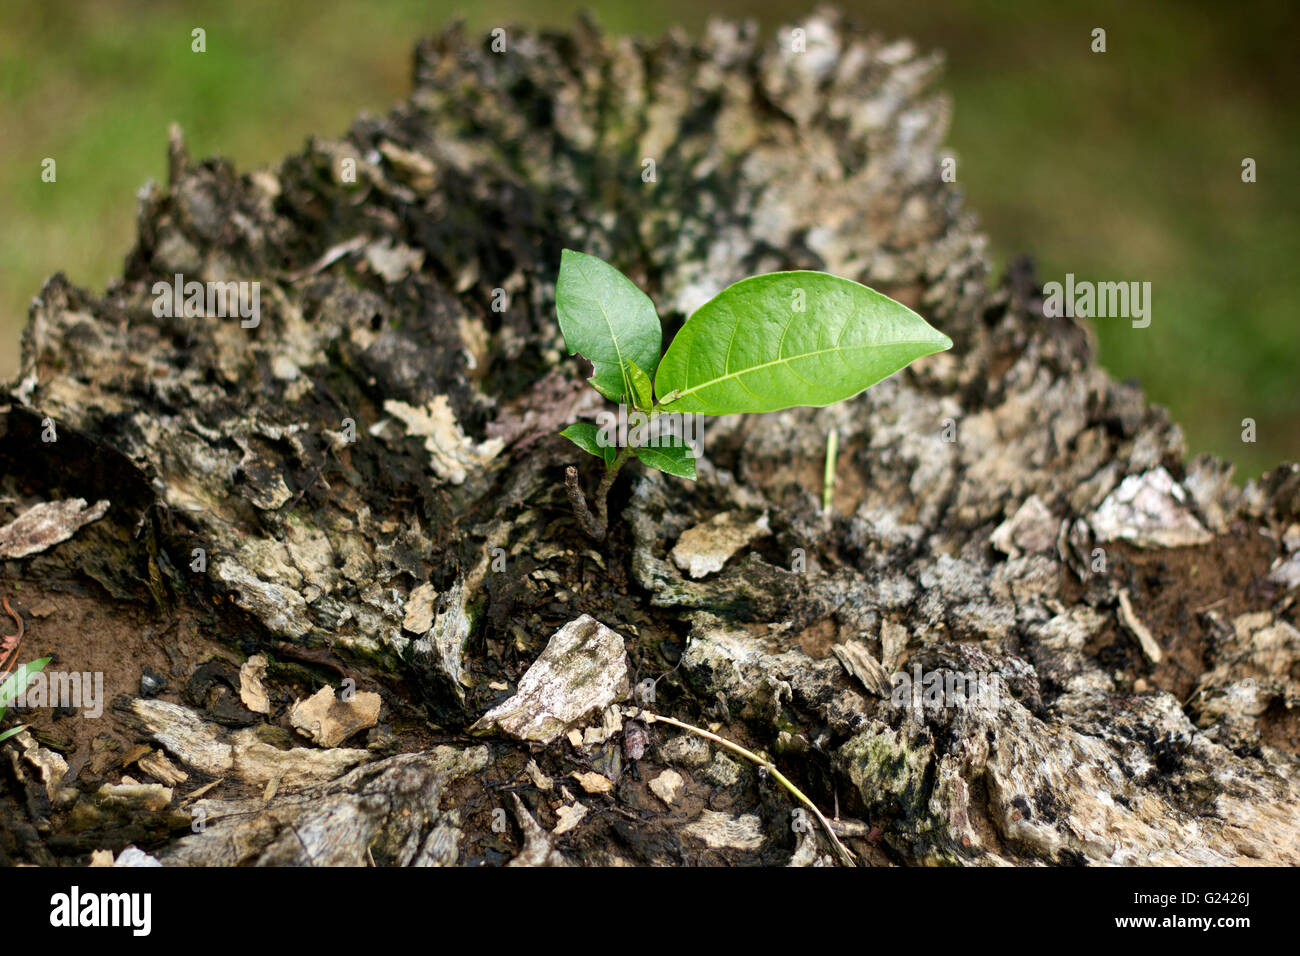 Growing Leaves on a Bark Tree Stock Photo